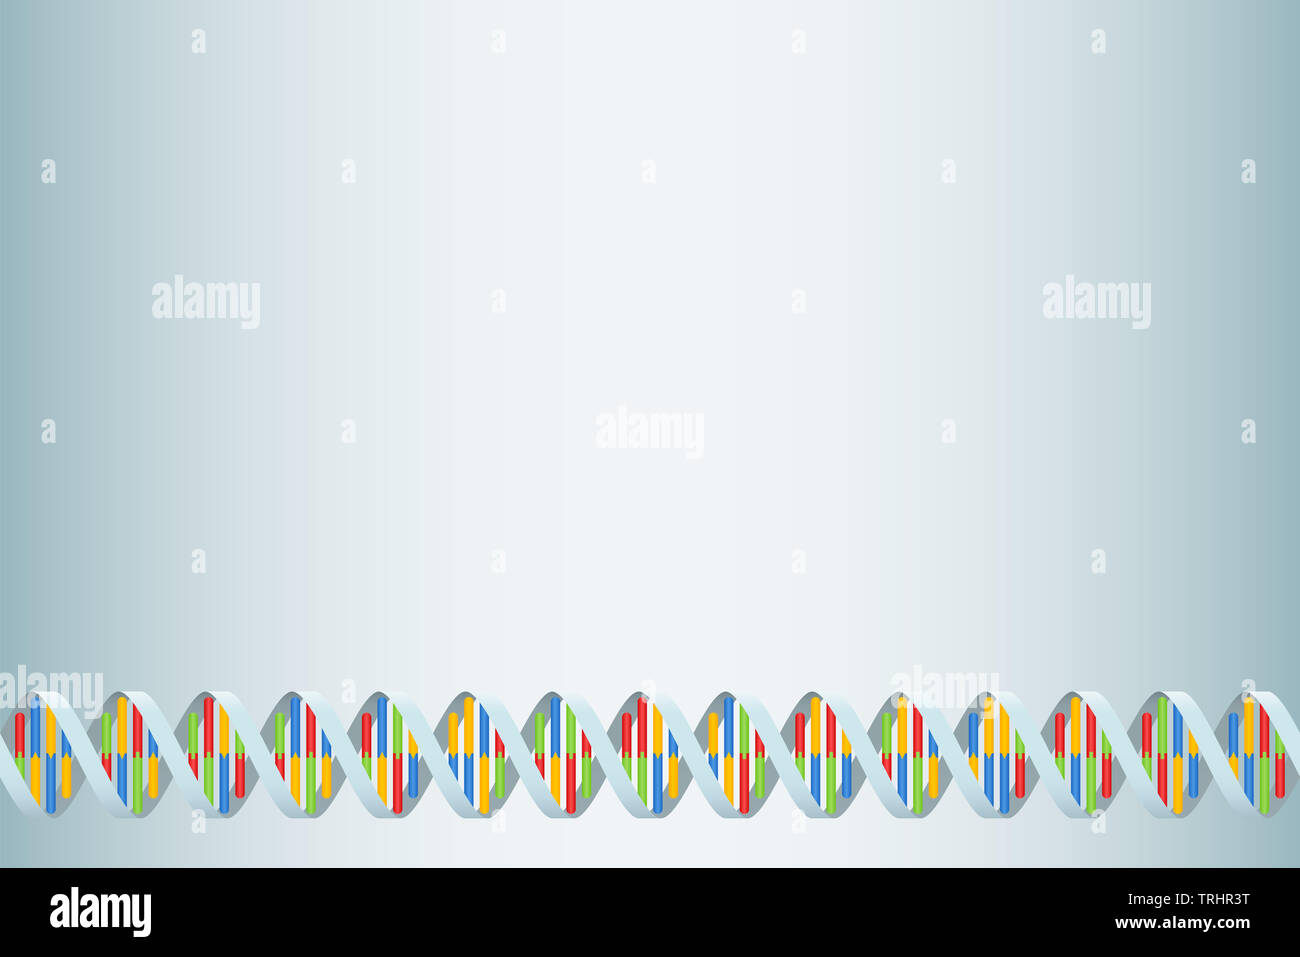 DNA double helix background with nucleobases adenine, cytosine, guanine and thymine in four different colors. Stock Photo